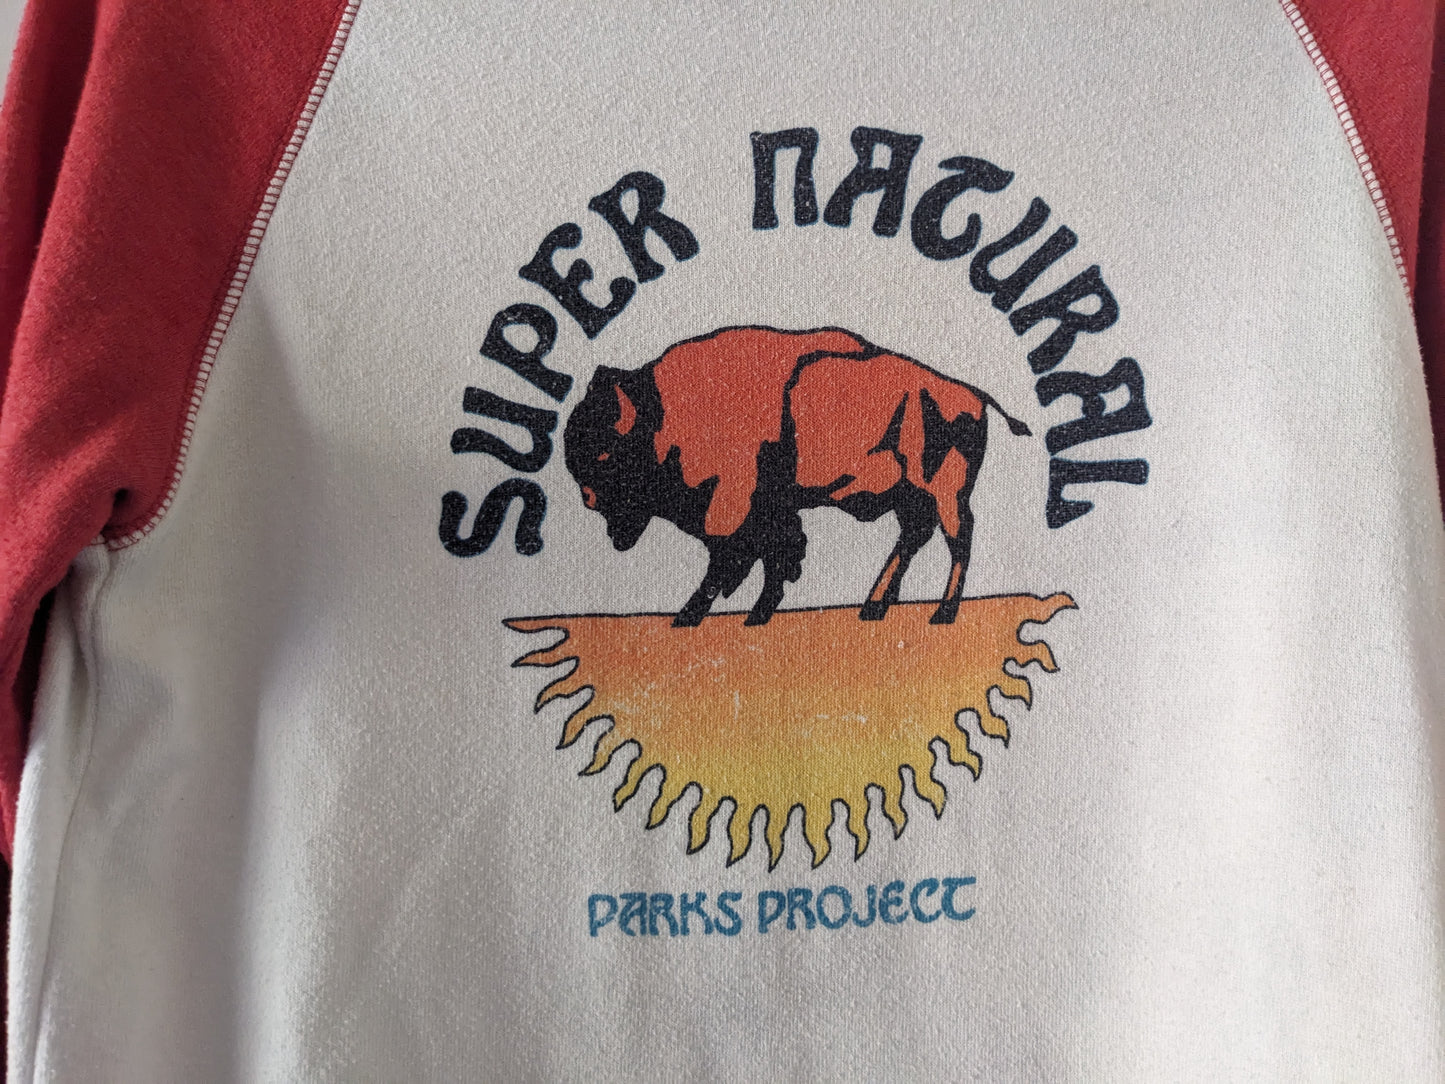 White and Red Parks Project Super Natural Bison fleece long sleeve shirt graphic